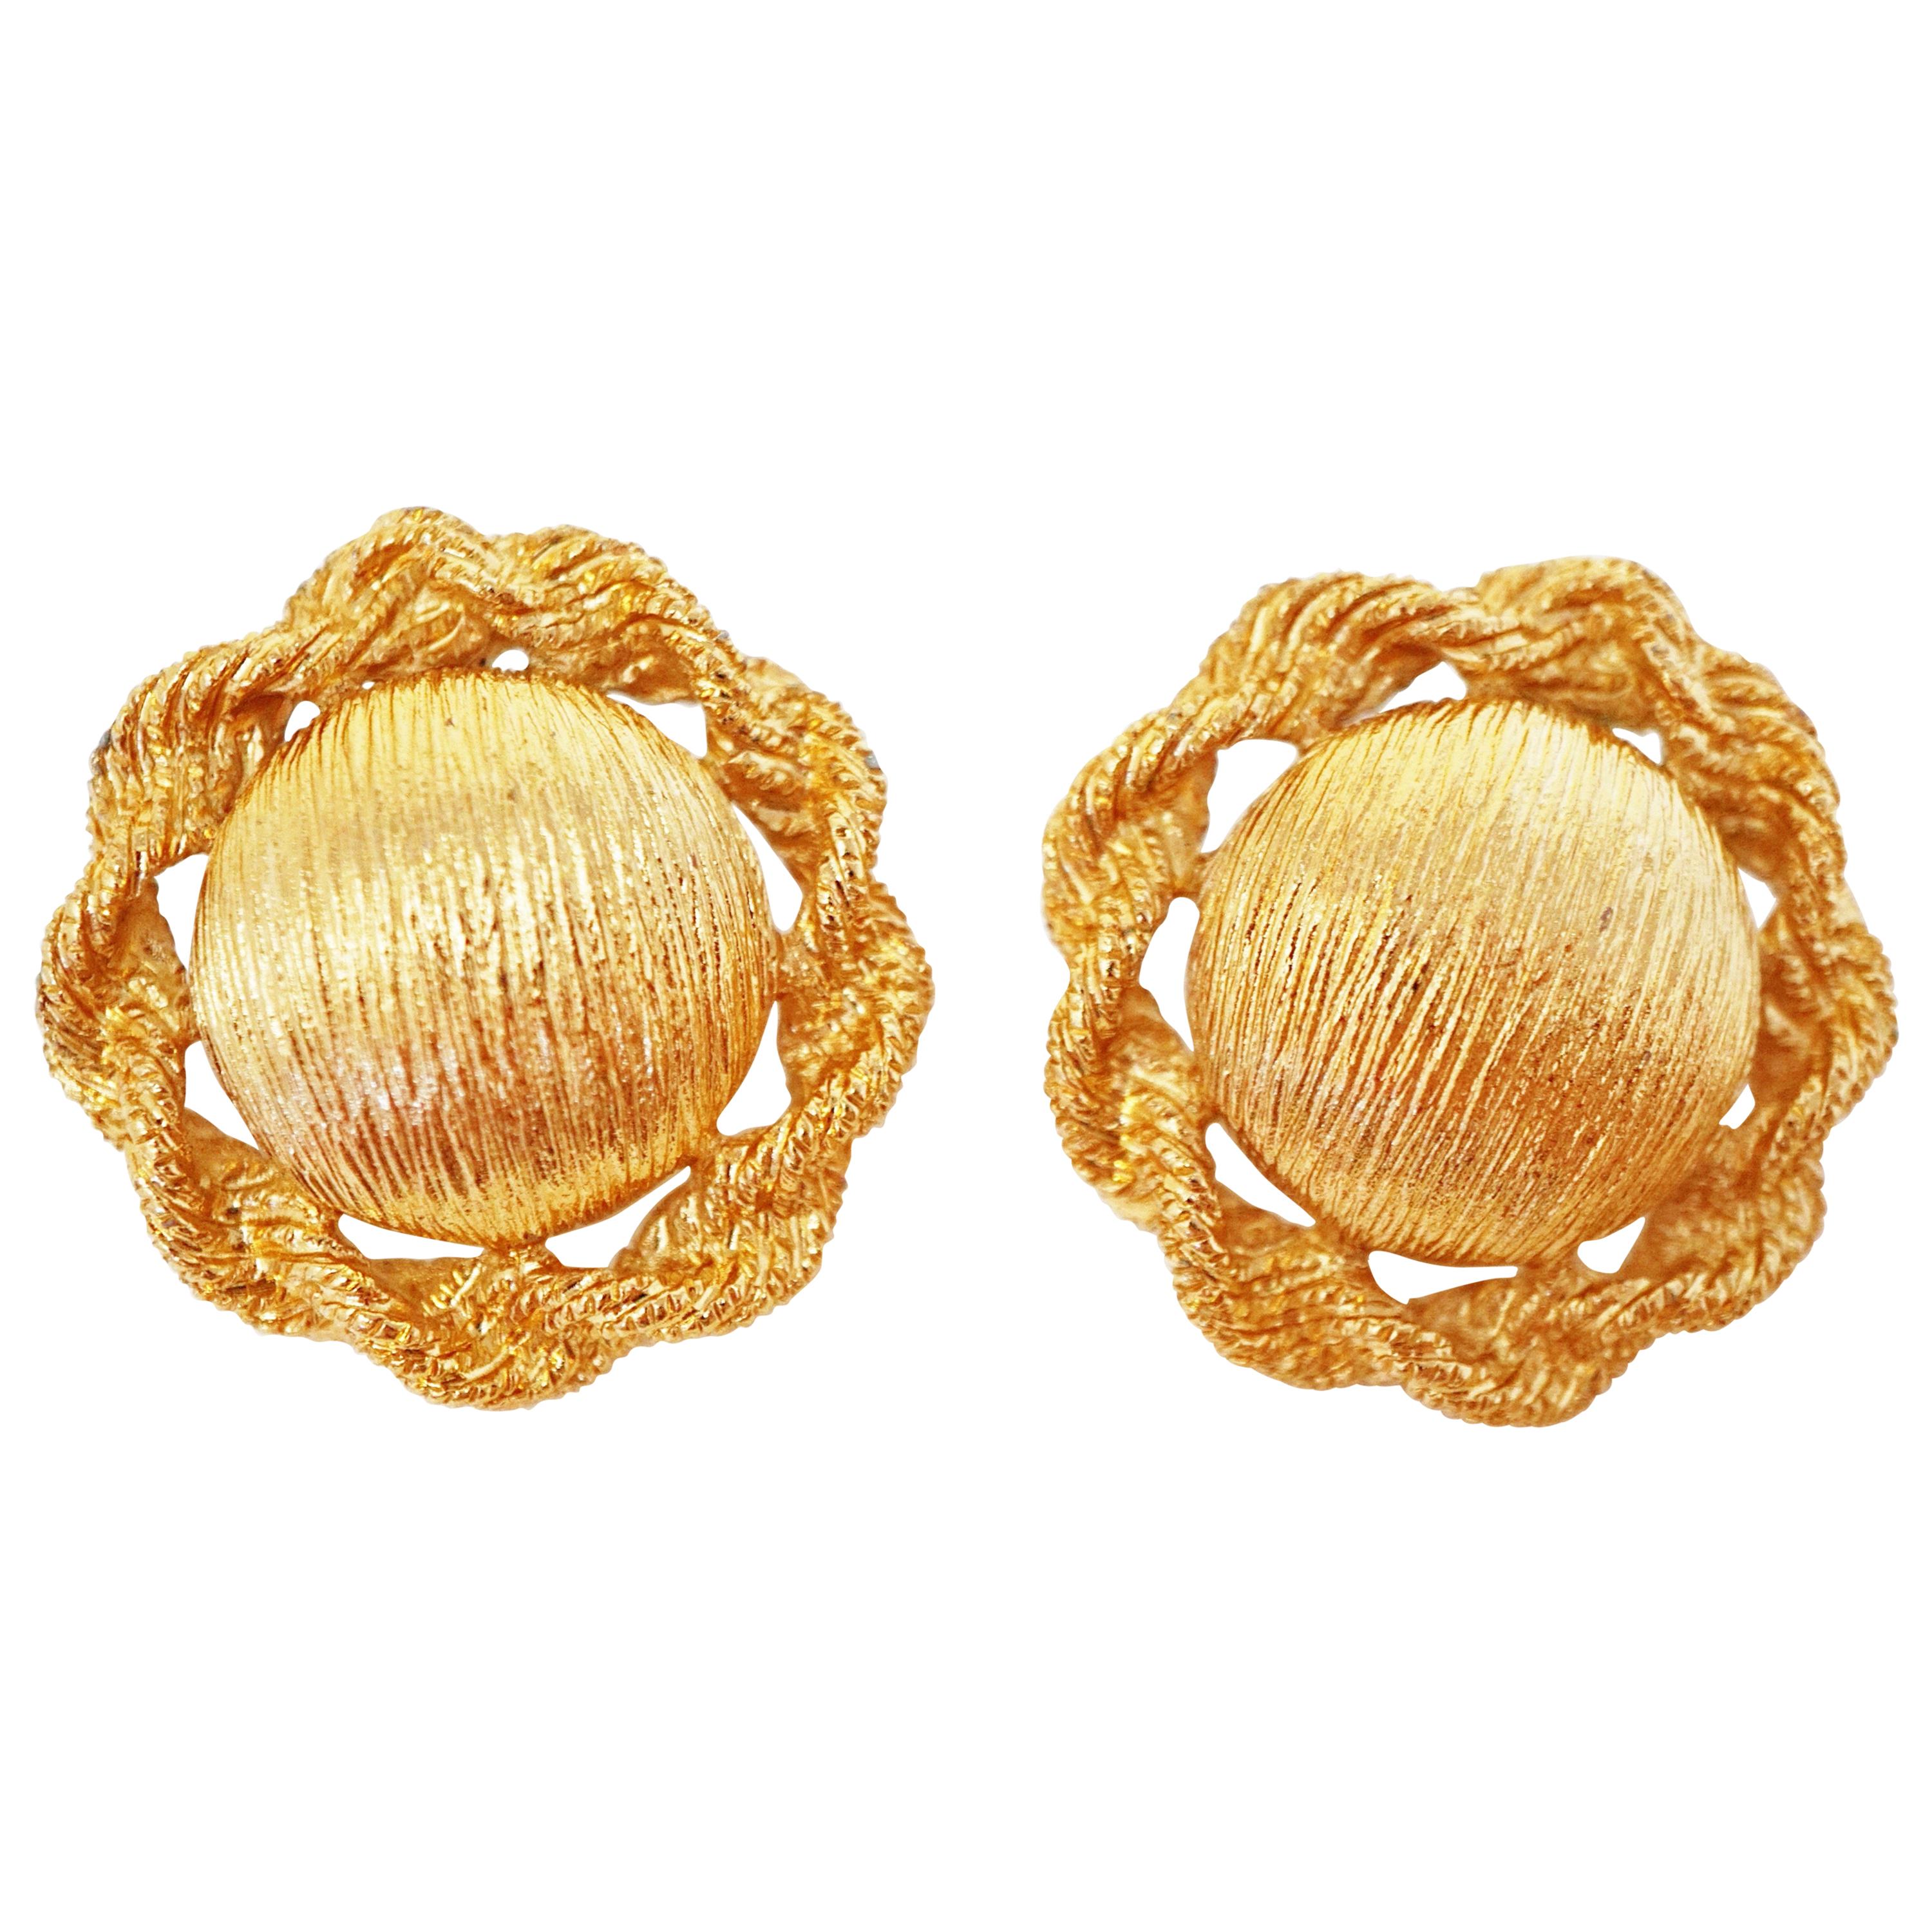 Textured Statement Earrings by Monet, Signed, circa 1955